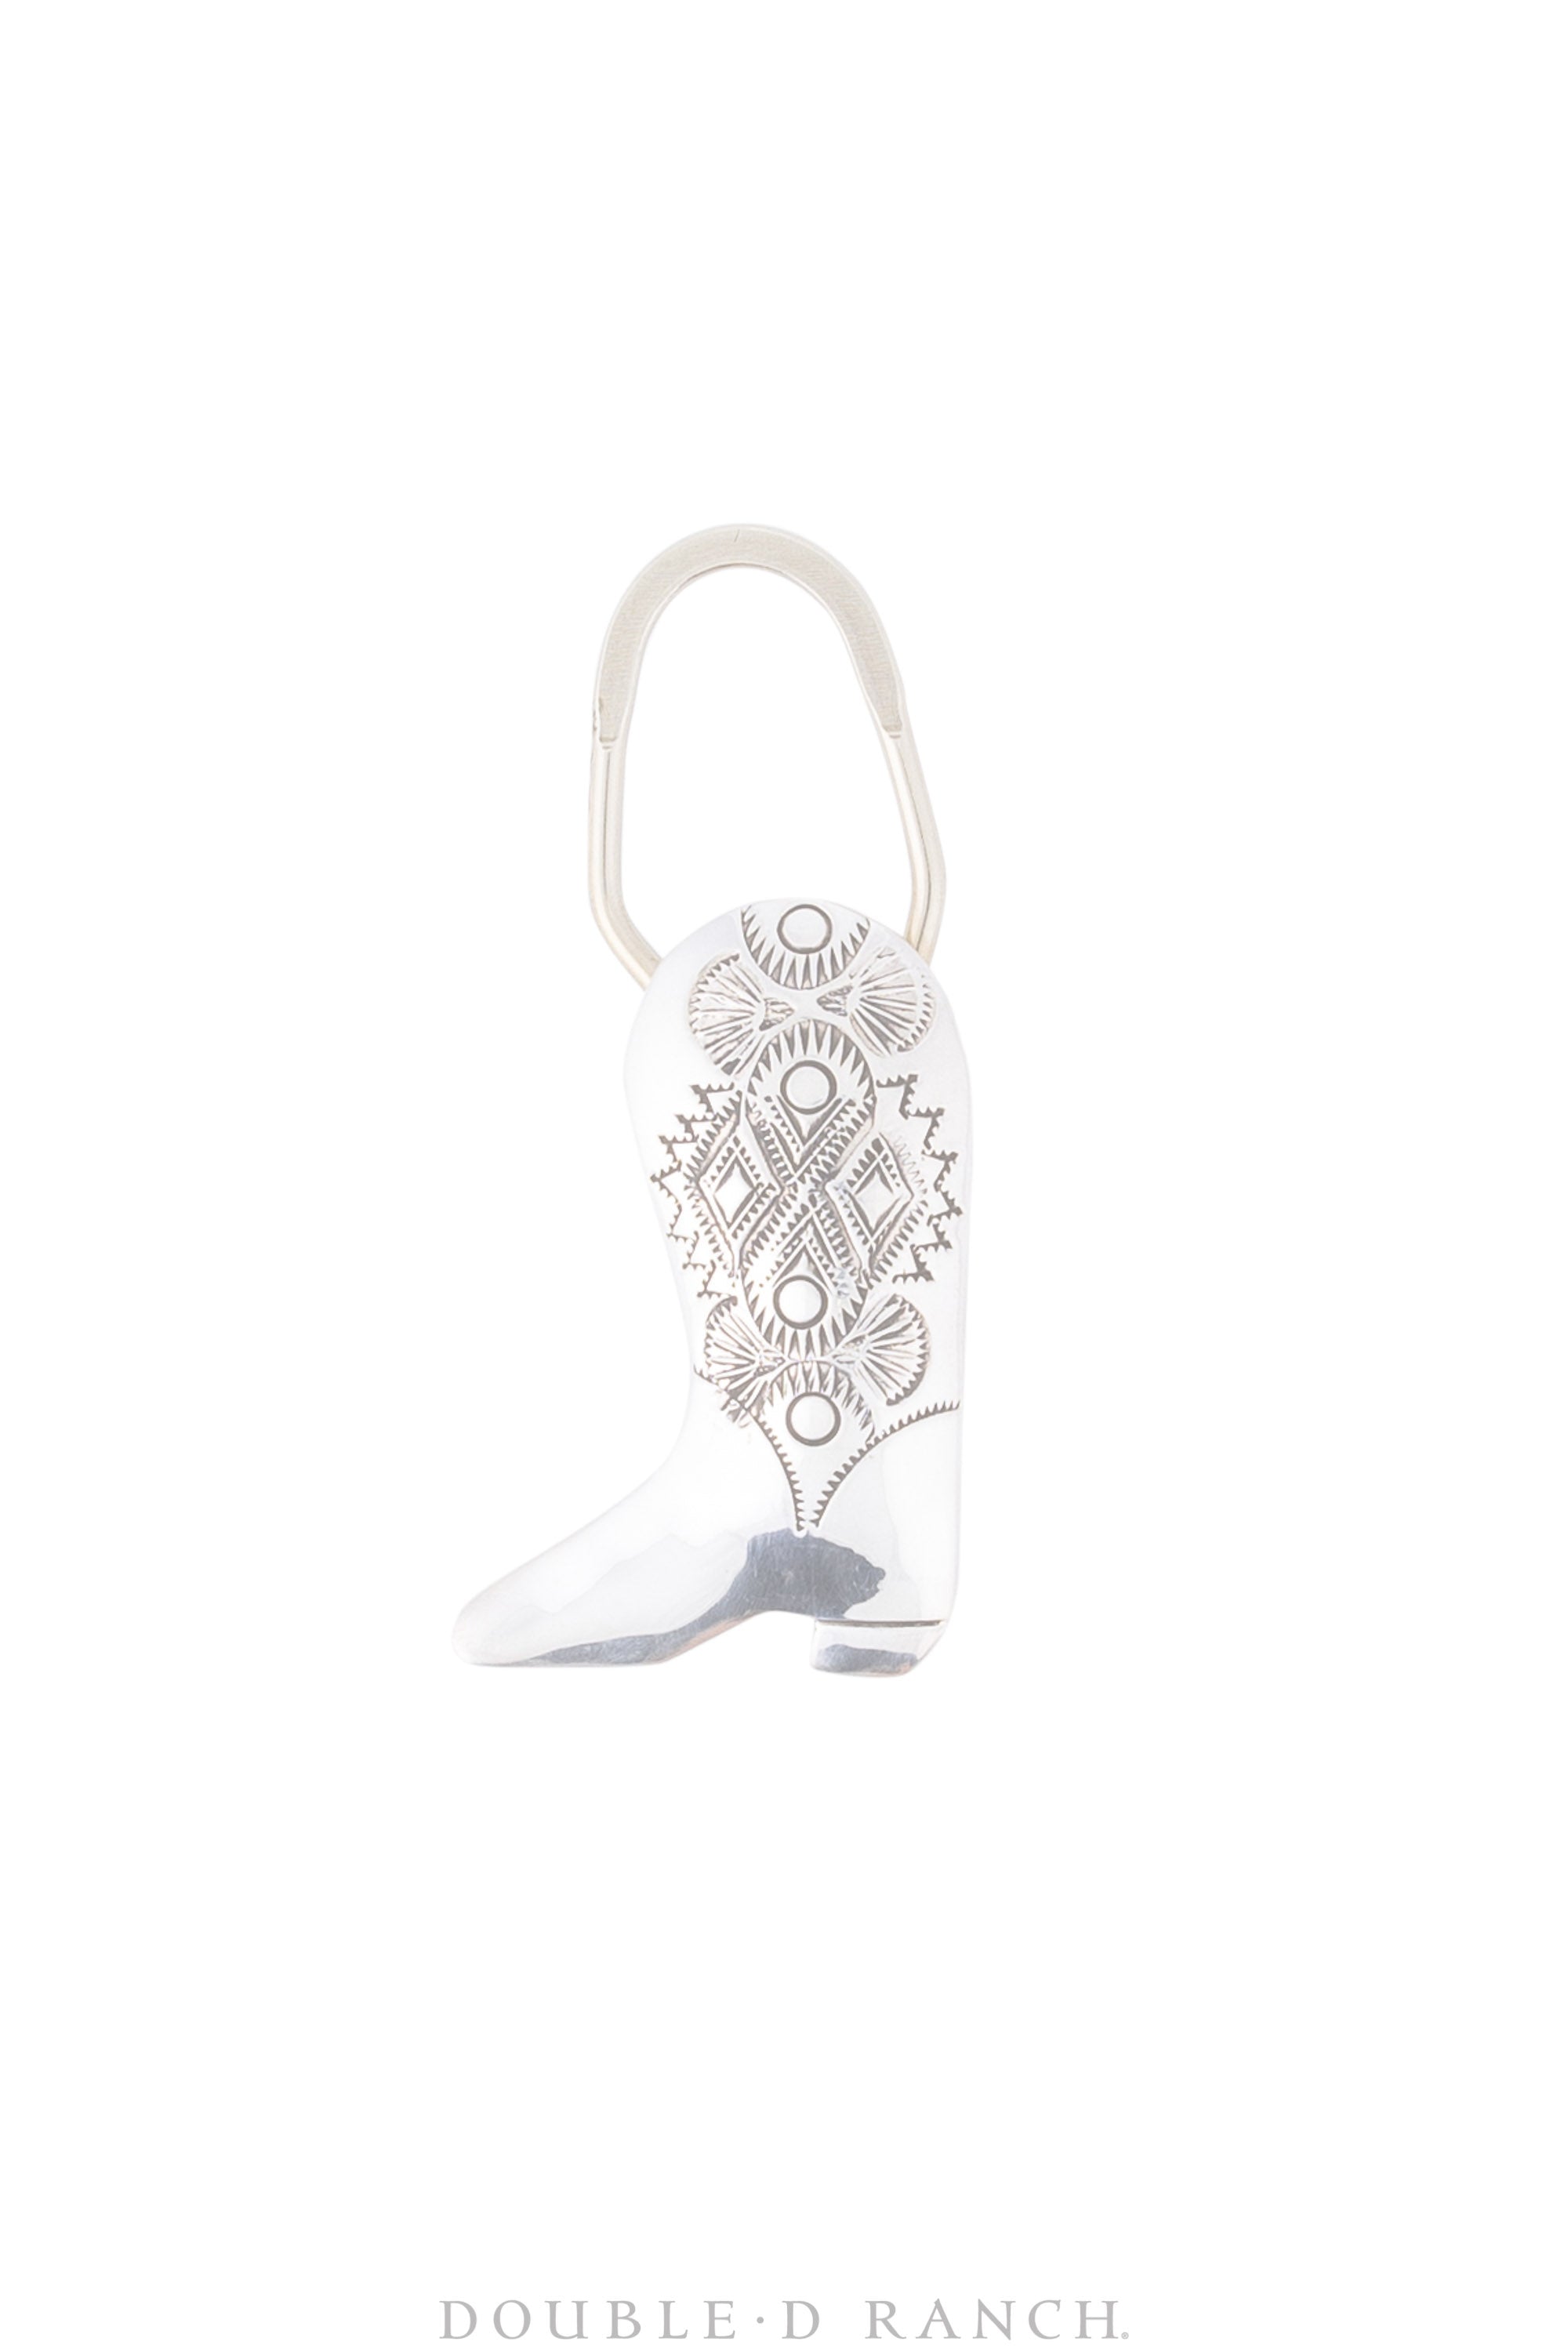 Miscellaneous, Key Ring, Sterling Silver, Boot, Hallmark, Contemporary, 386